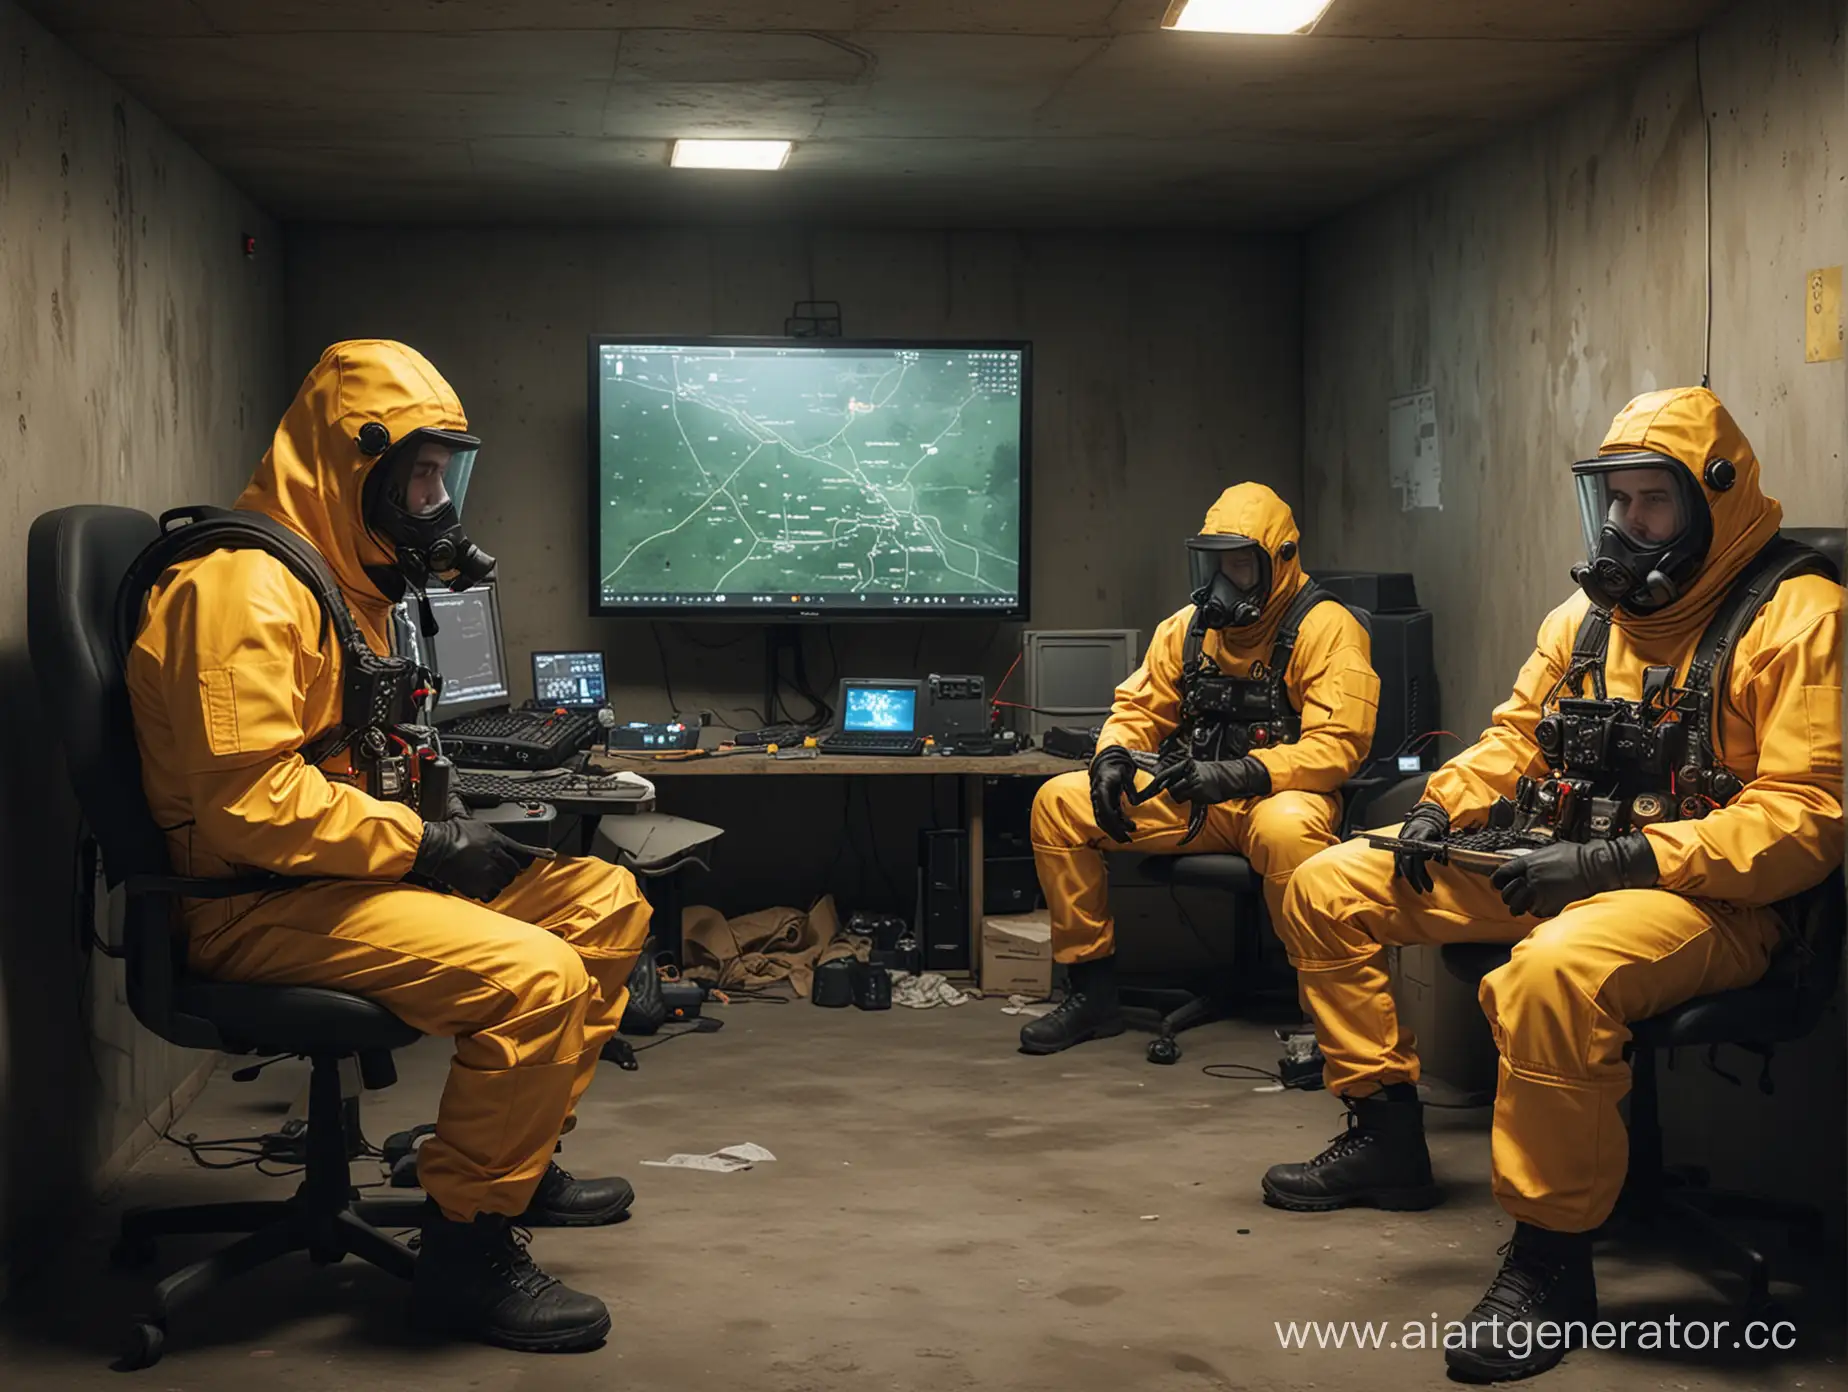 Hazmat-Suit-Gamers-in-Cyber-Bunker-Futuristic-Gaming-Experience